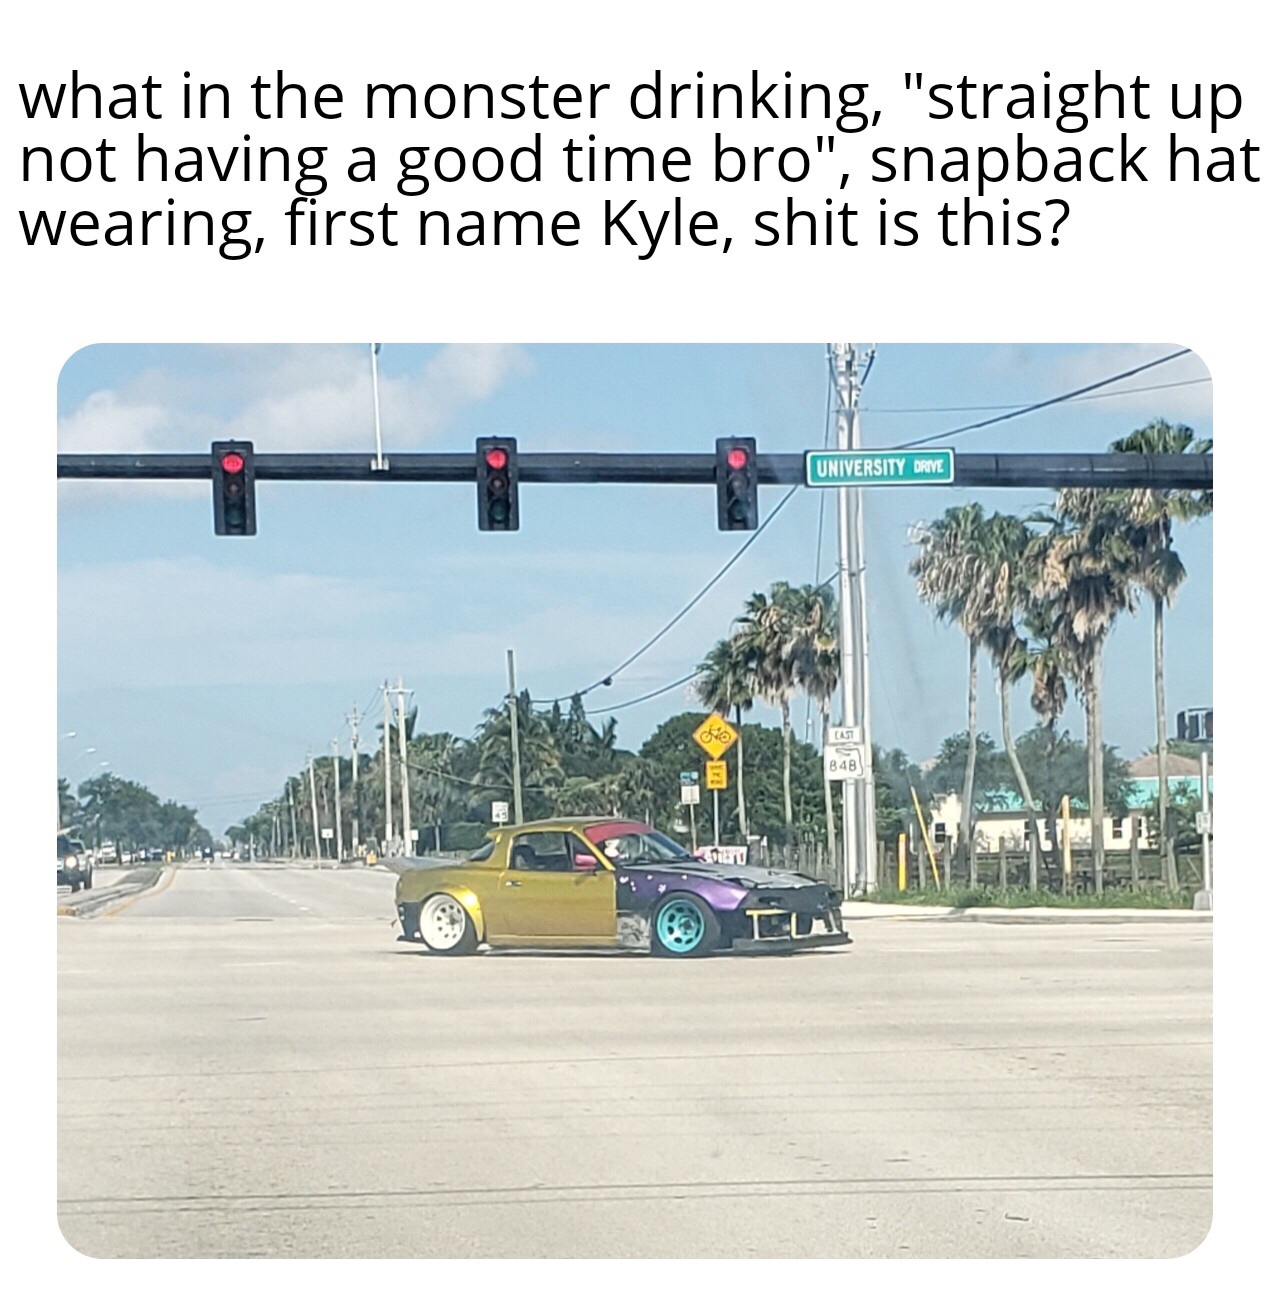 tyler is zero calorie kyle - what in the monster drinking, "straight up not having a good time bro", snapback hat wearing, first name Kyle, shit is this? University Drive No Cas 848